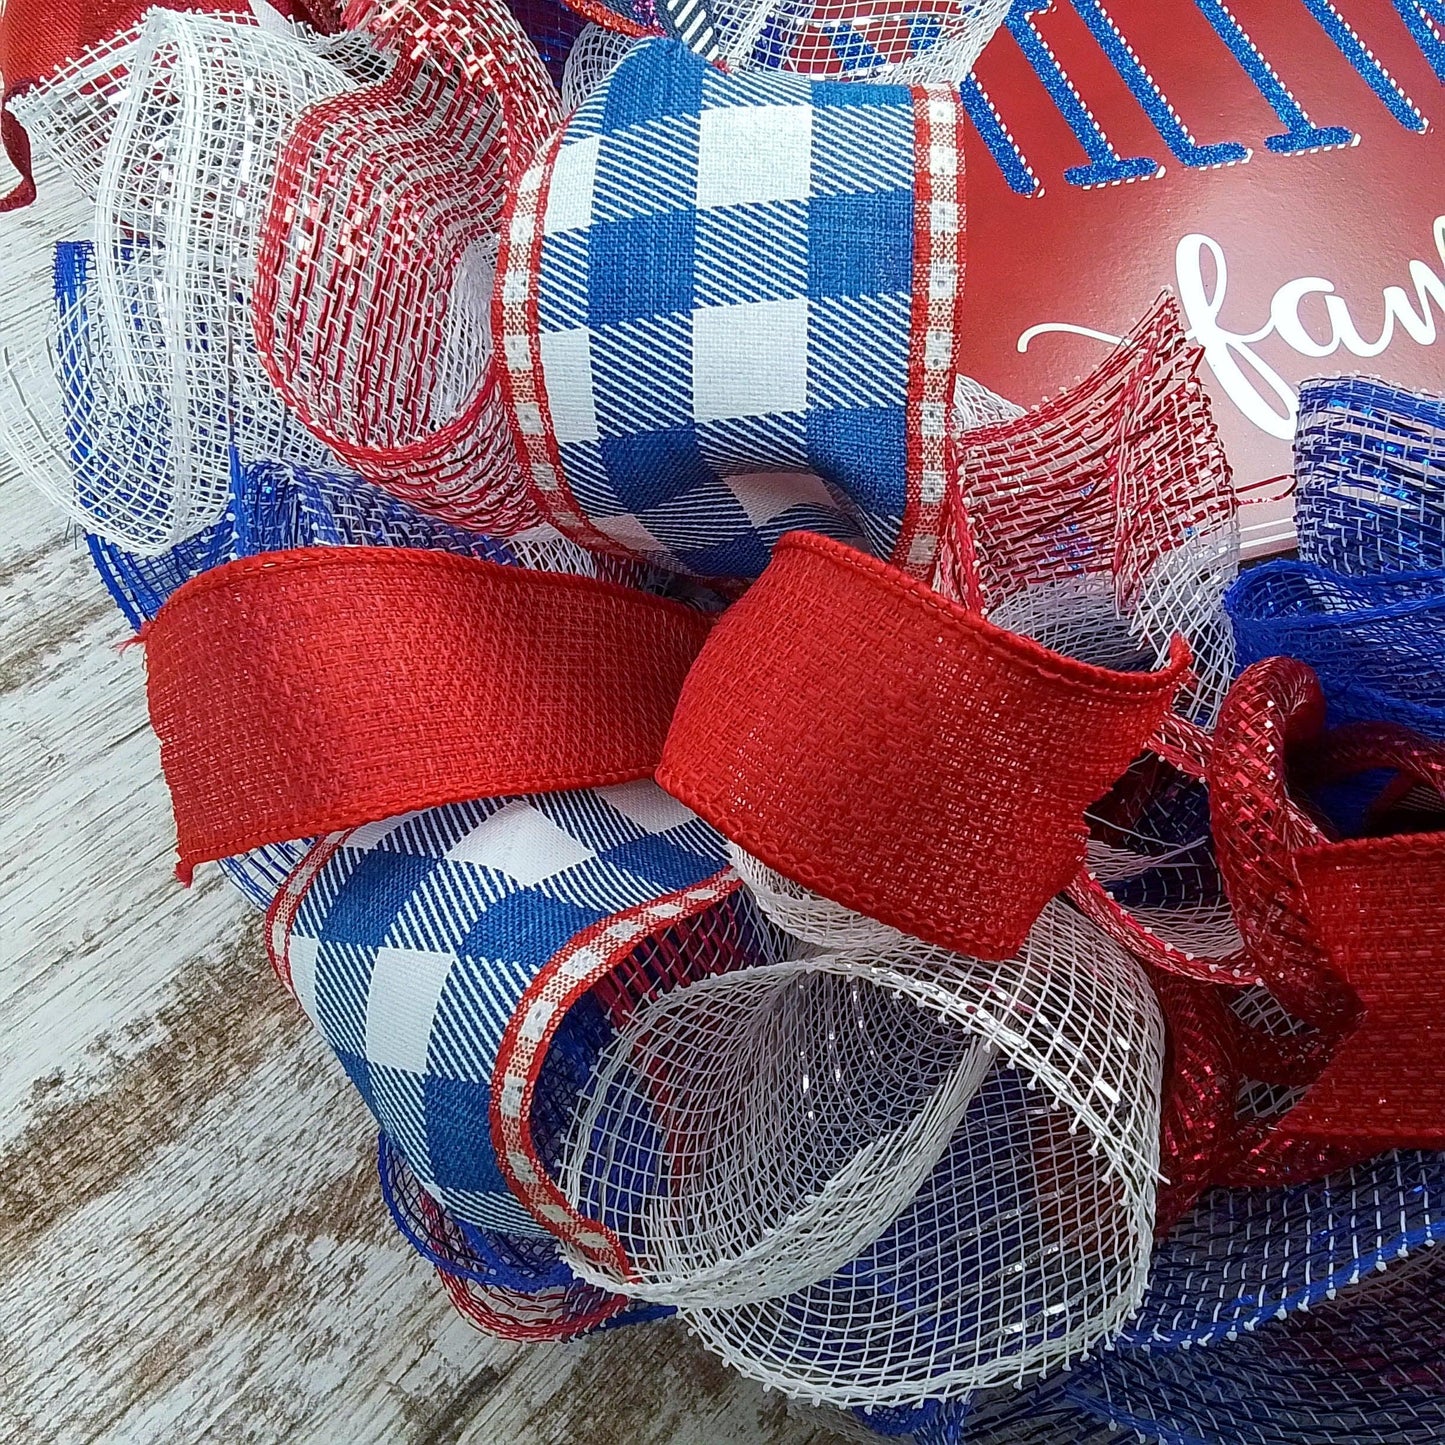 Fourth of July Wreath - USA Proud Military Family Decor - Patriotic Red White Blue Flag Decoration - Pink Door Wreaths